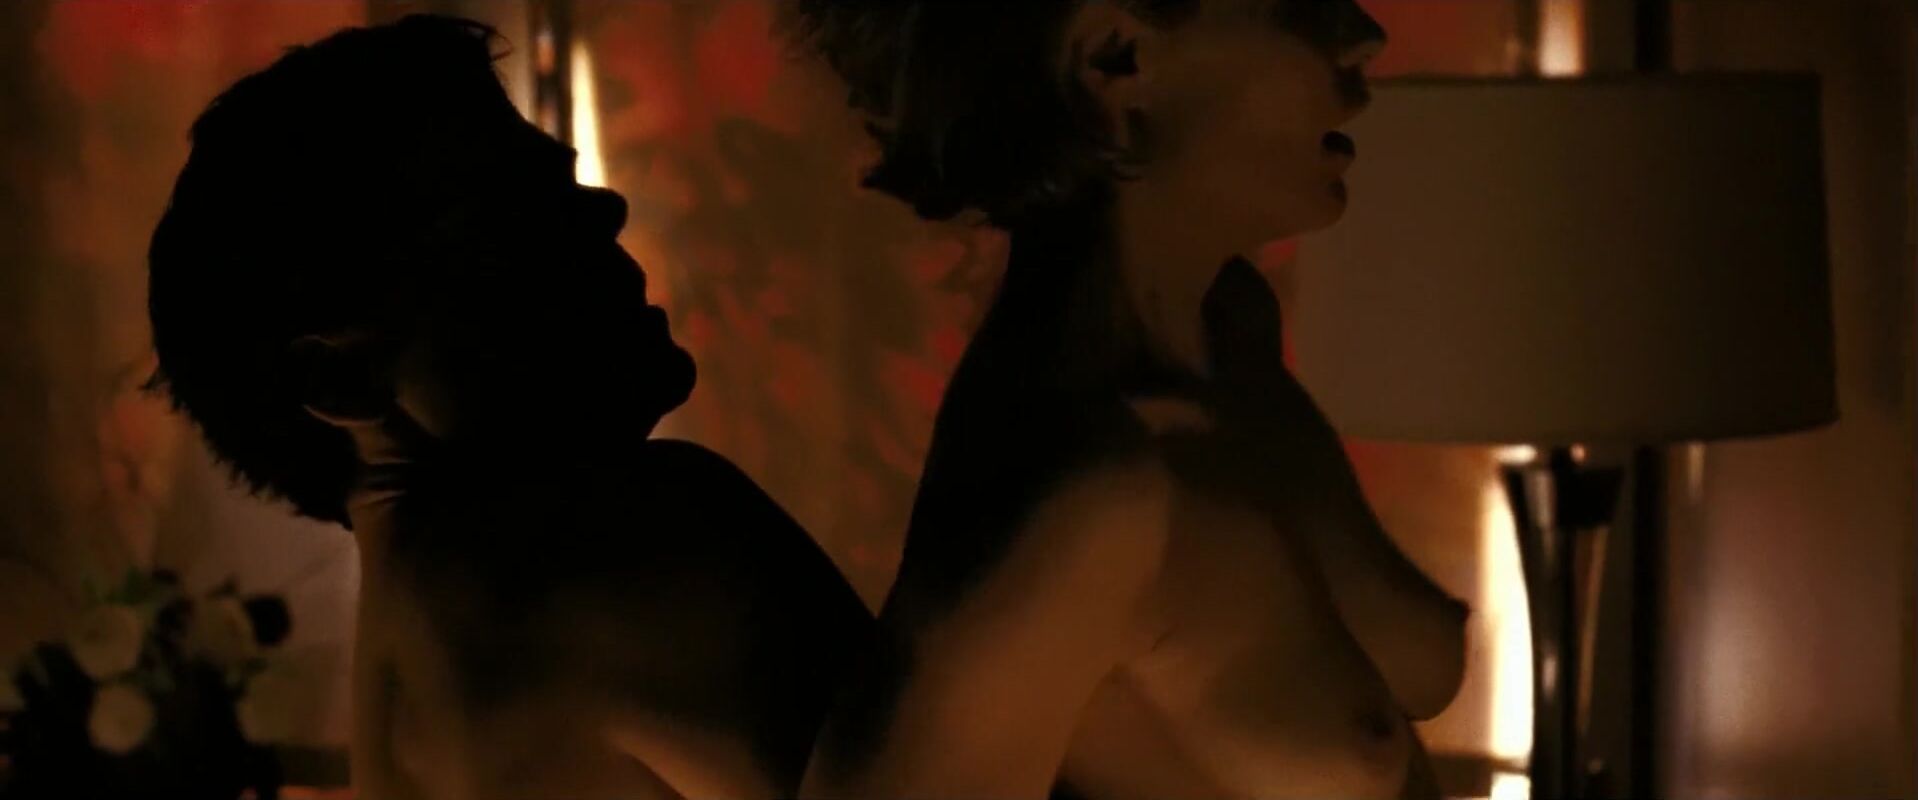 Sexy Girl Sex Feast of Love is story of Radha Mitchell and Alexa Davalos nude being banged many times NXTComics - 1